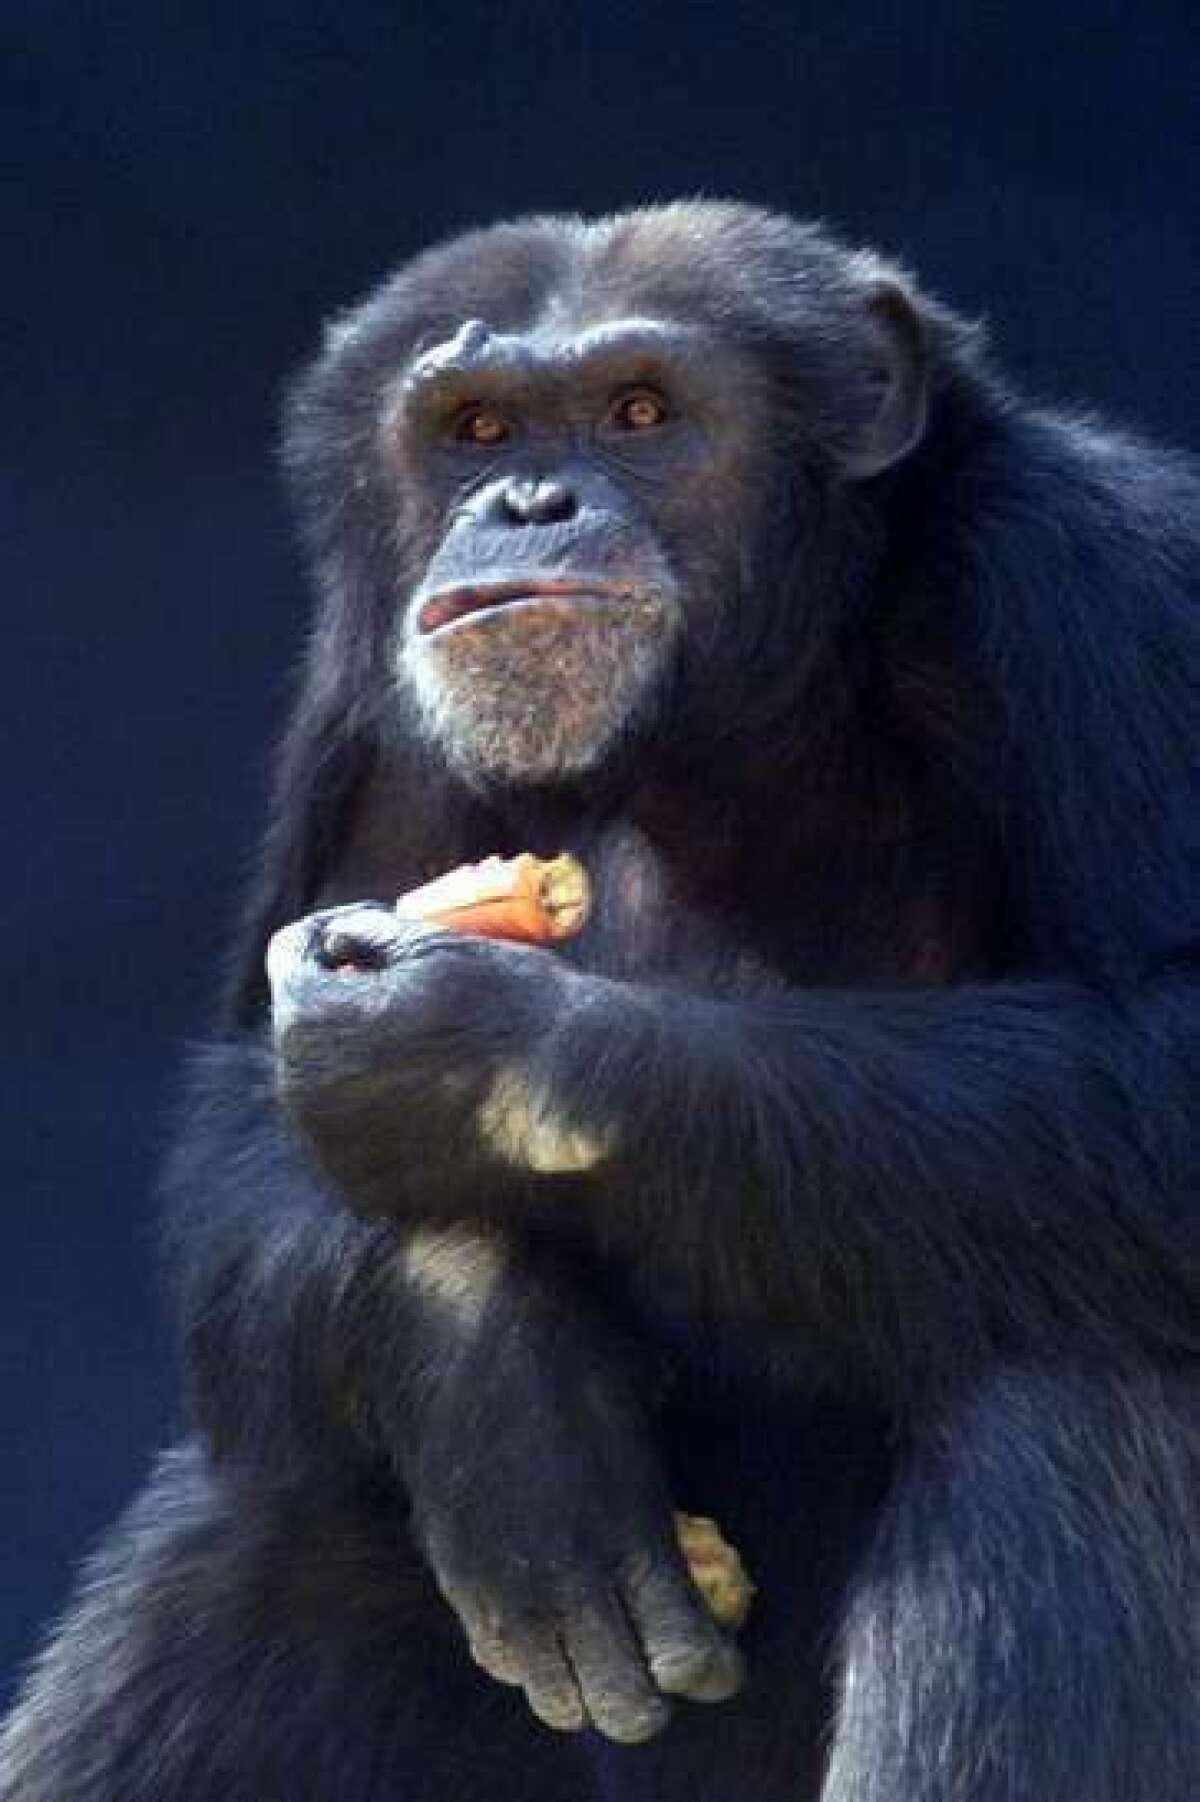 A study in PNAS involving a sharing game suggests that chimpanzees may have a sense of fairness akin to that of human beings.